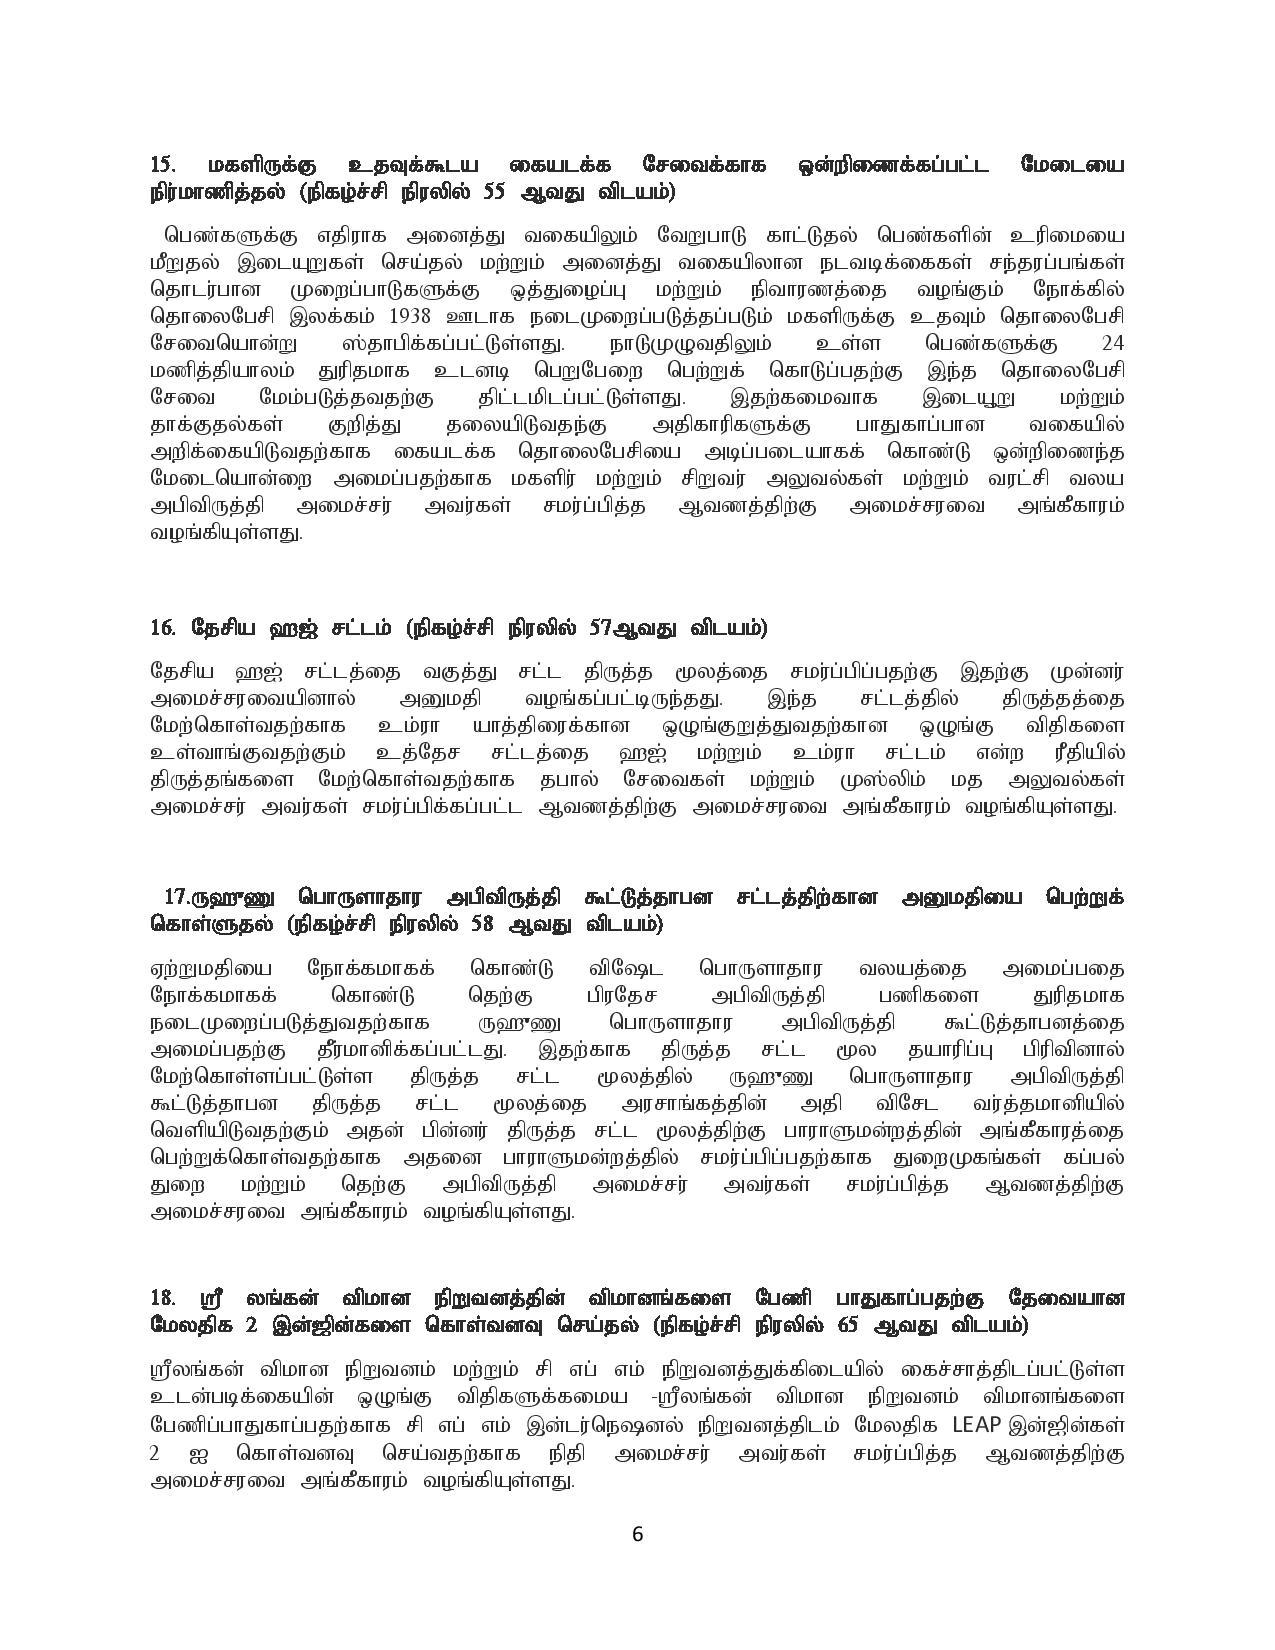 cabinet decision Tamil 19.07.2019 page 006